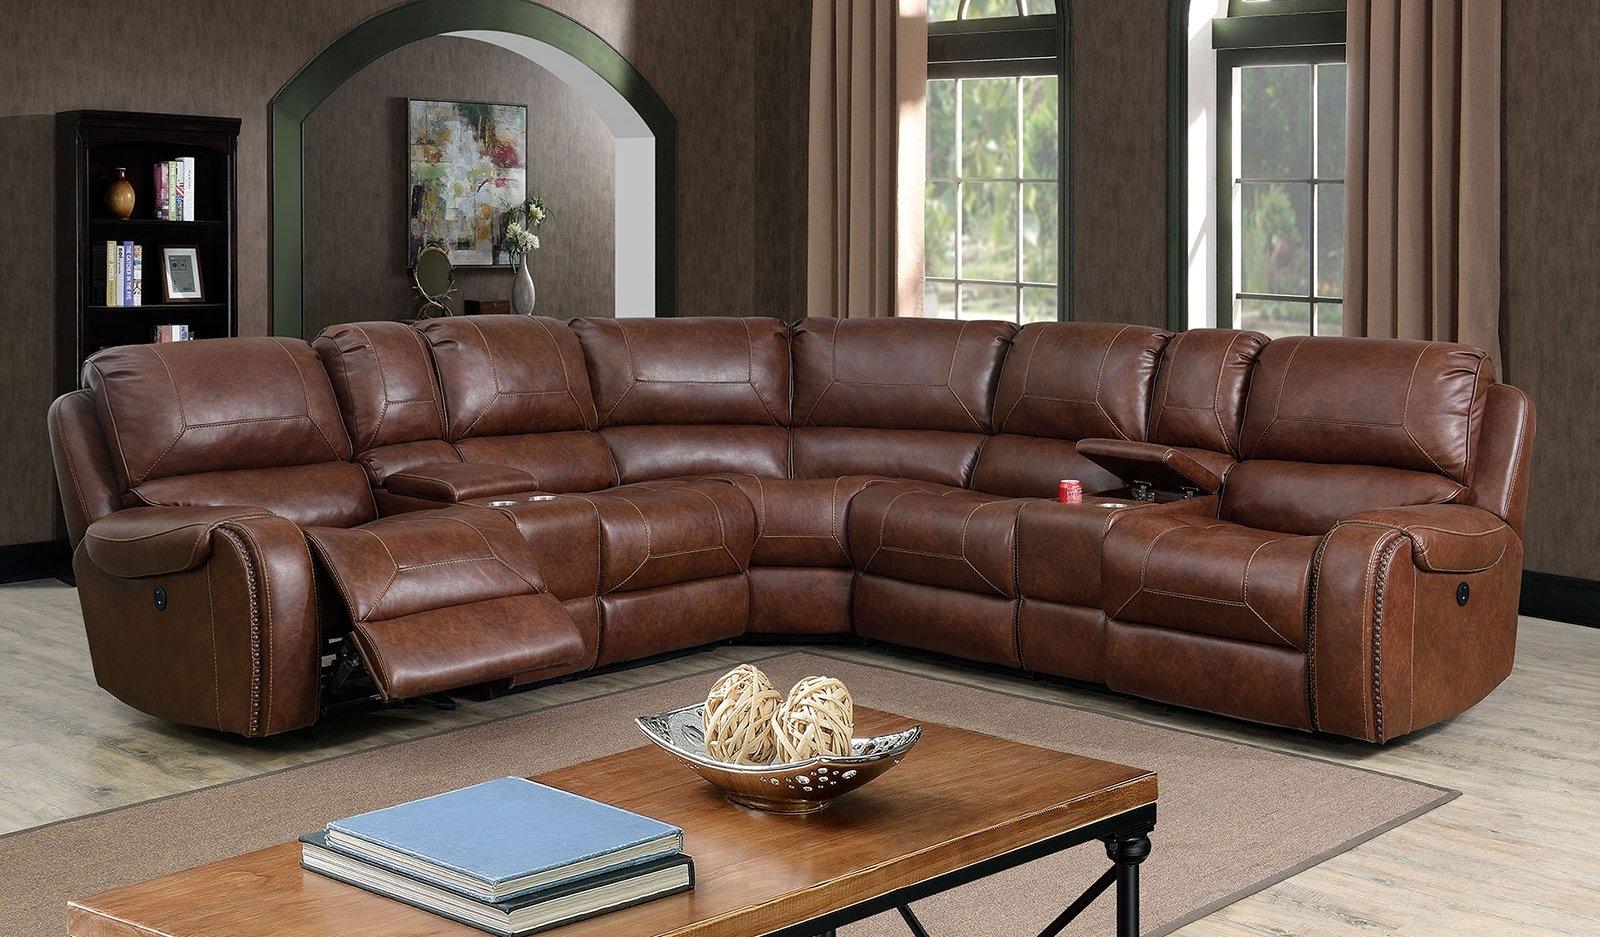 Transitional Power Sectional CM6951BR-PM-SECT Joanne CM6951BR-PM-SECT in Brown Leatherette